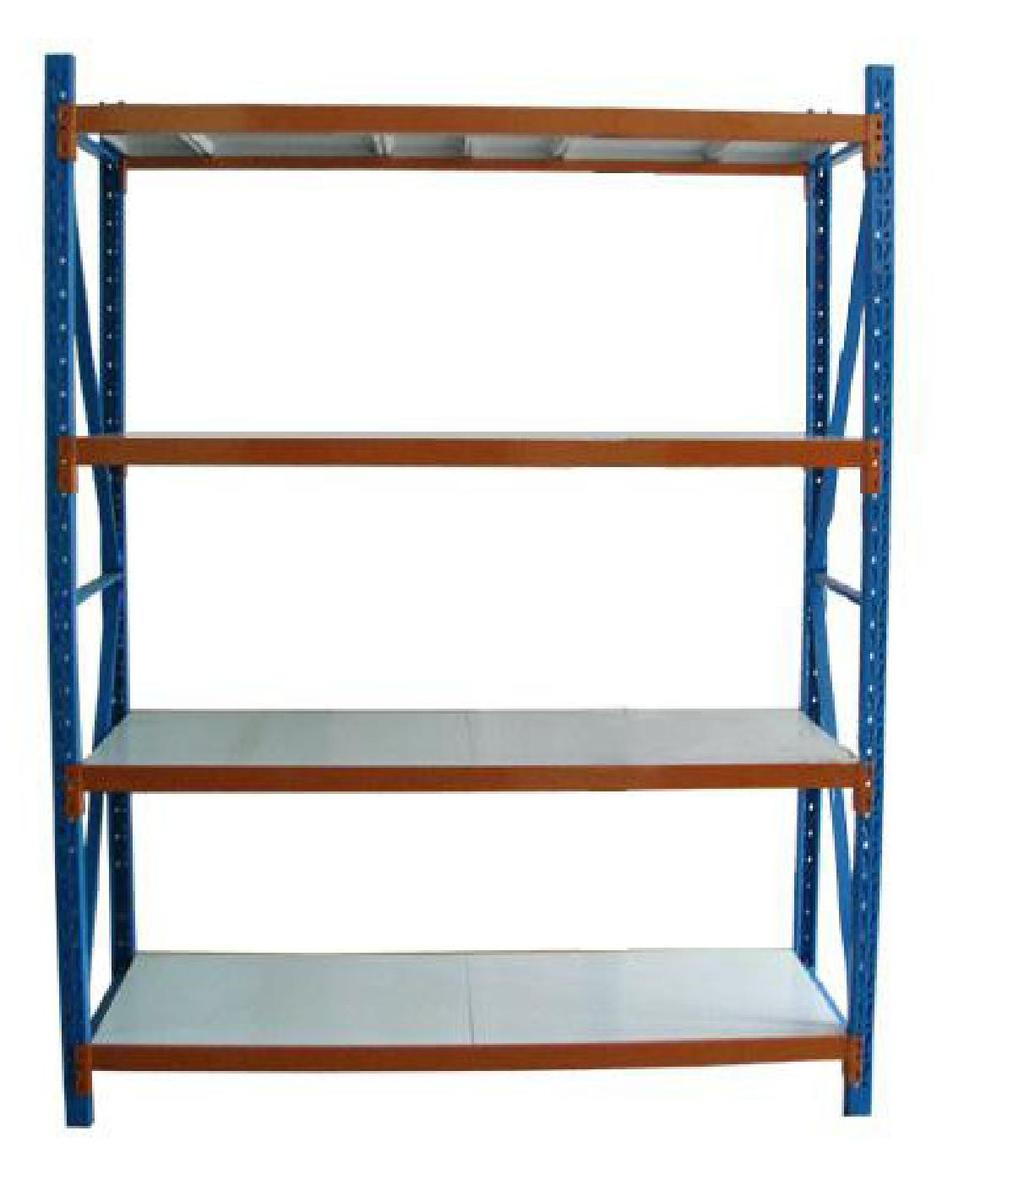 2. Longspan racking system - Medium duty B rack Load capacity 400kg/layer. Simple structure, assembles in minutes. It can be limitless connection.